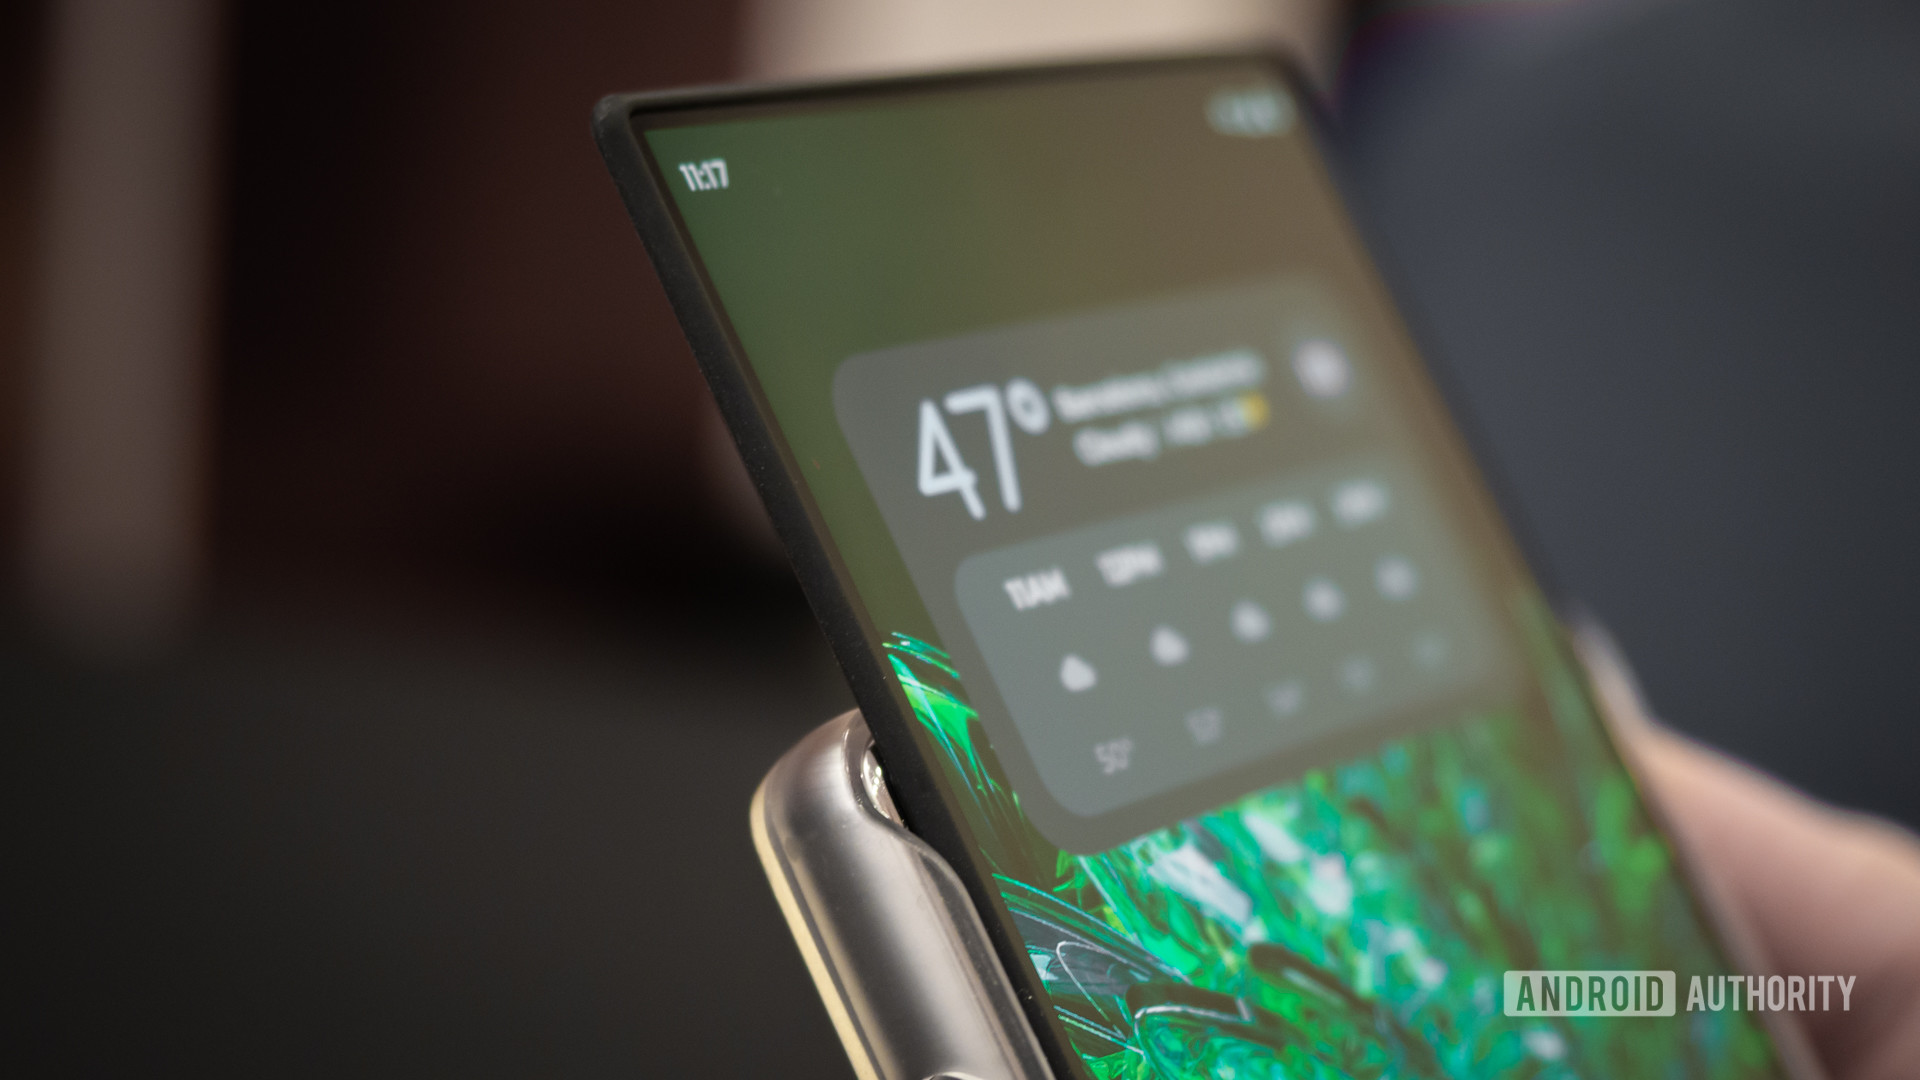 The display of the Motorola Rizr phone is rollable at the top